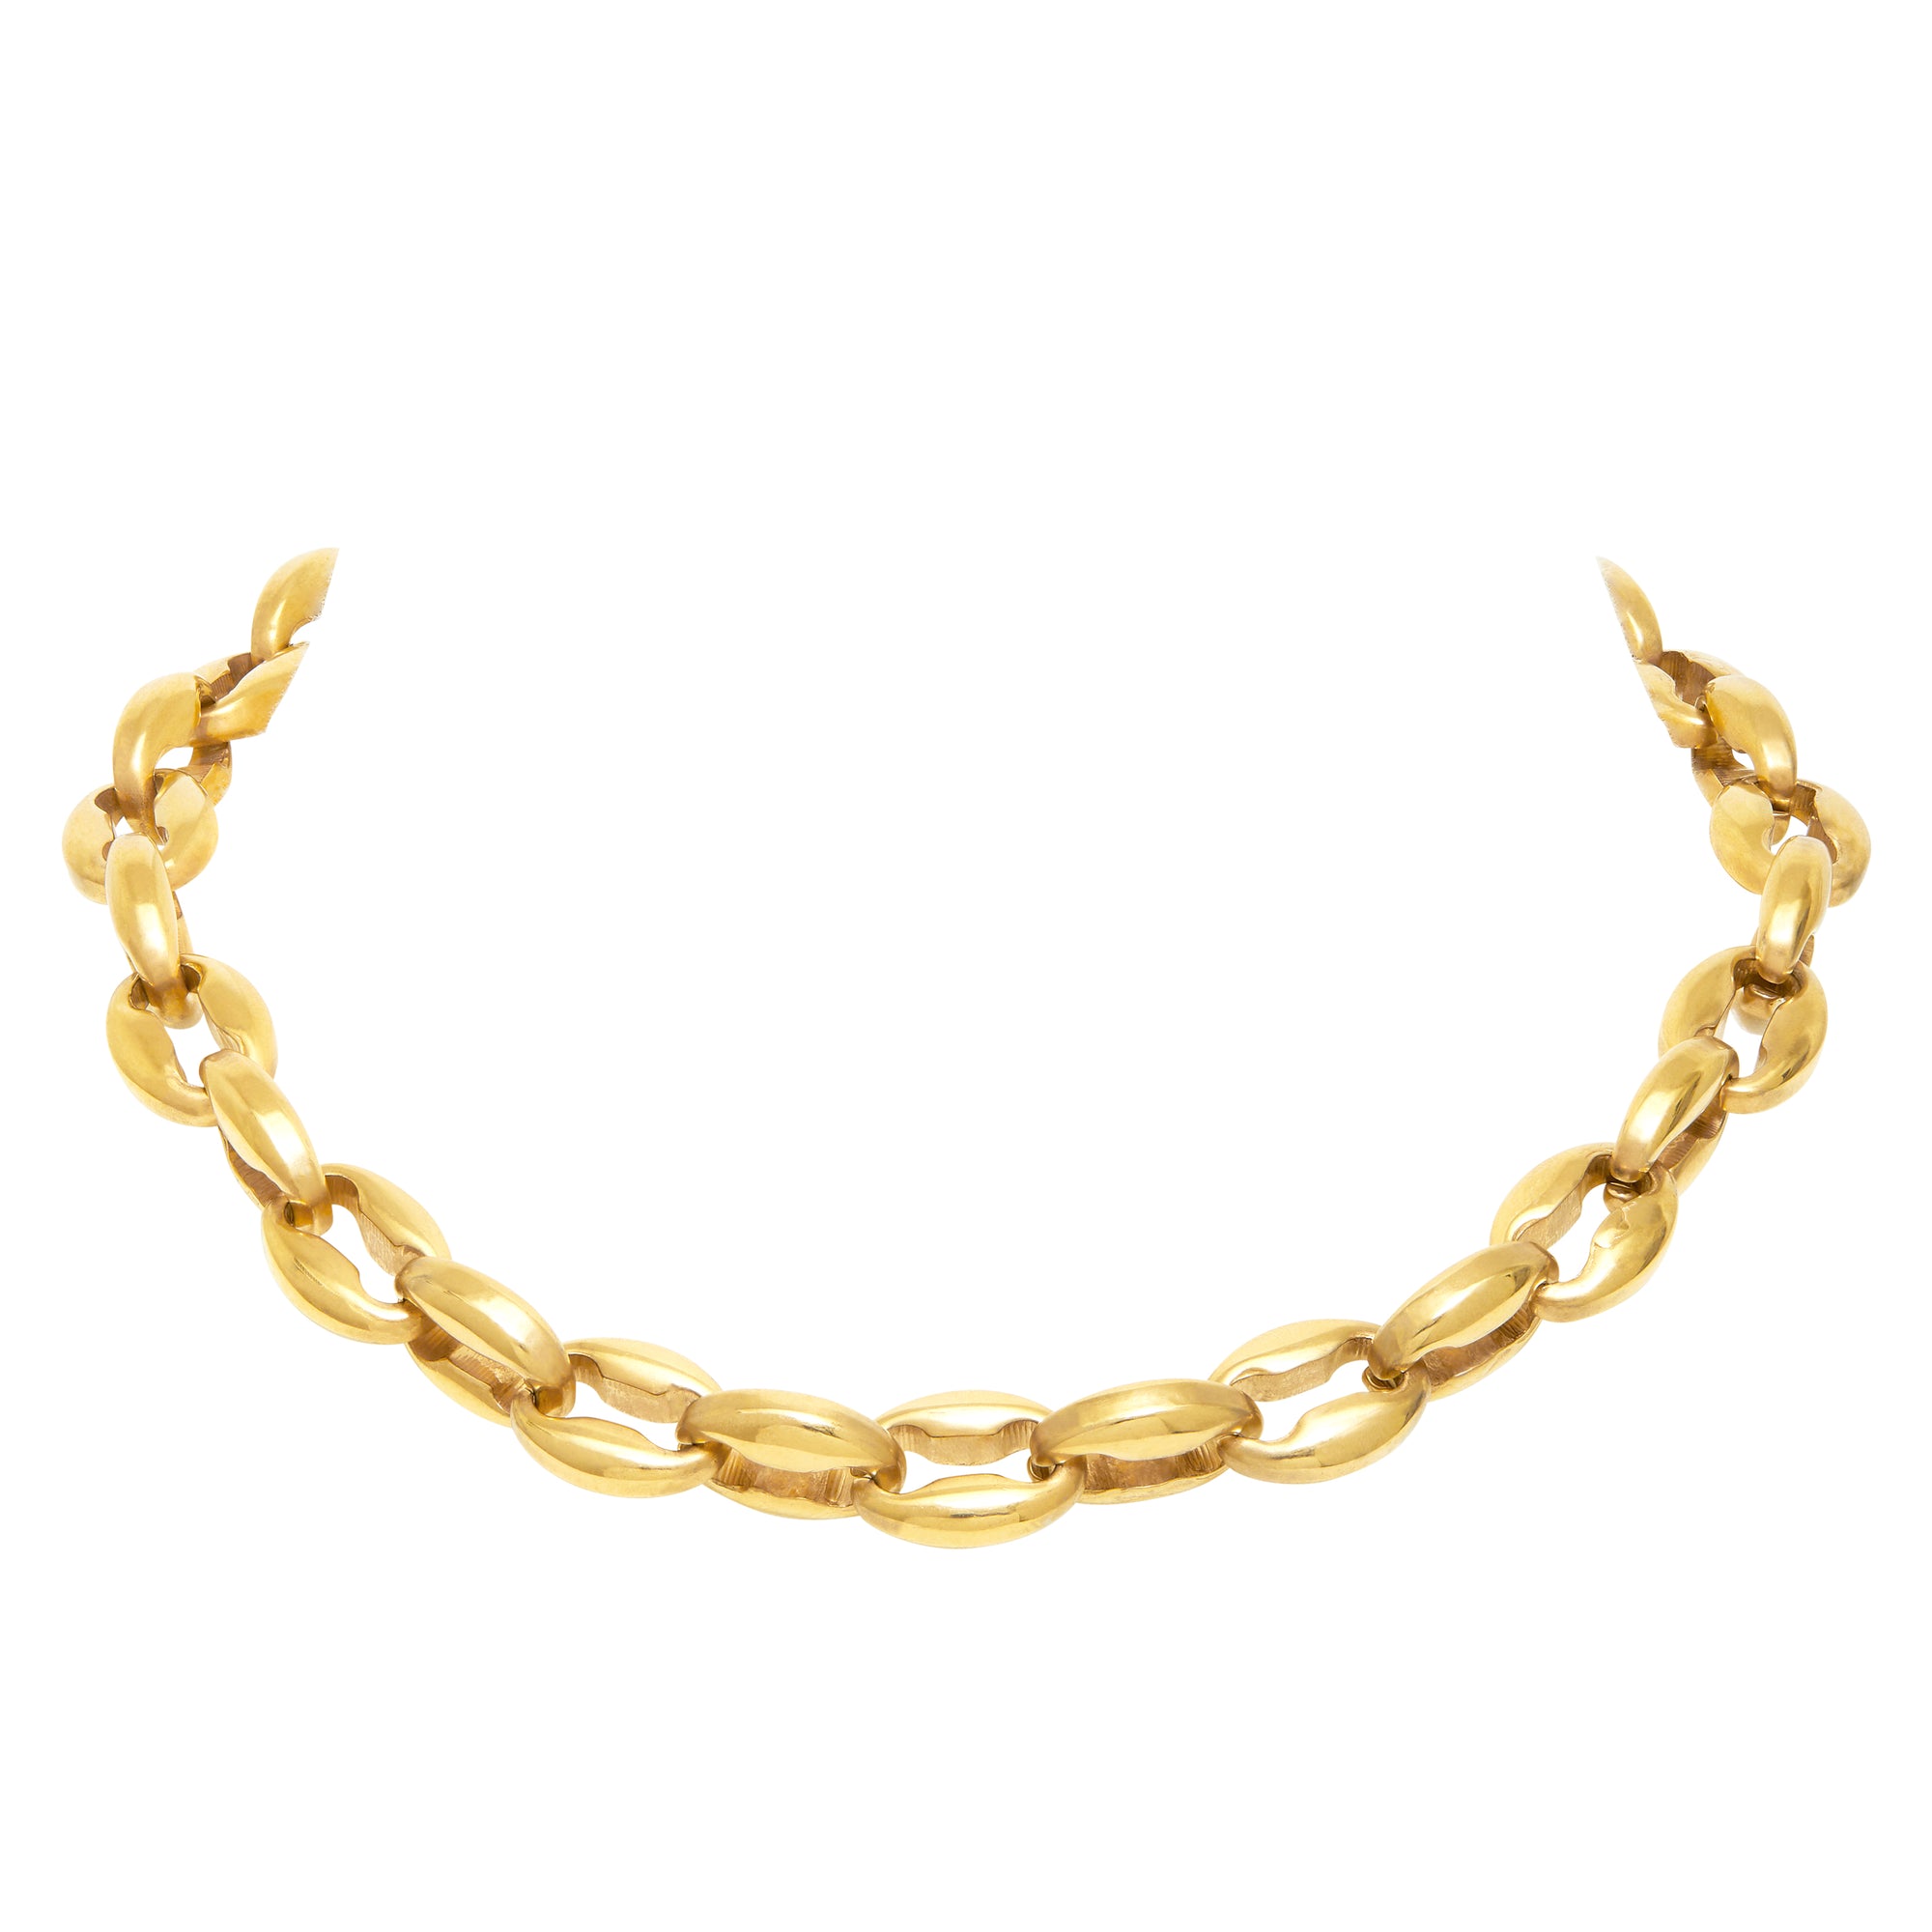 TOSCANO CHAIN NECKLACE - GOLD